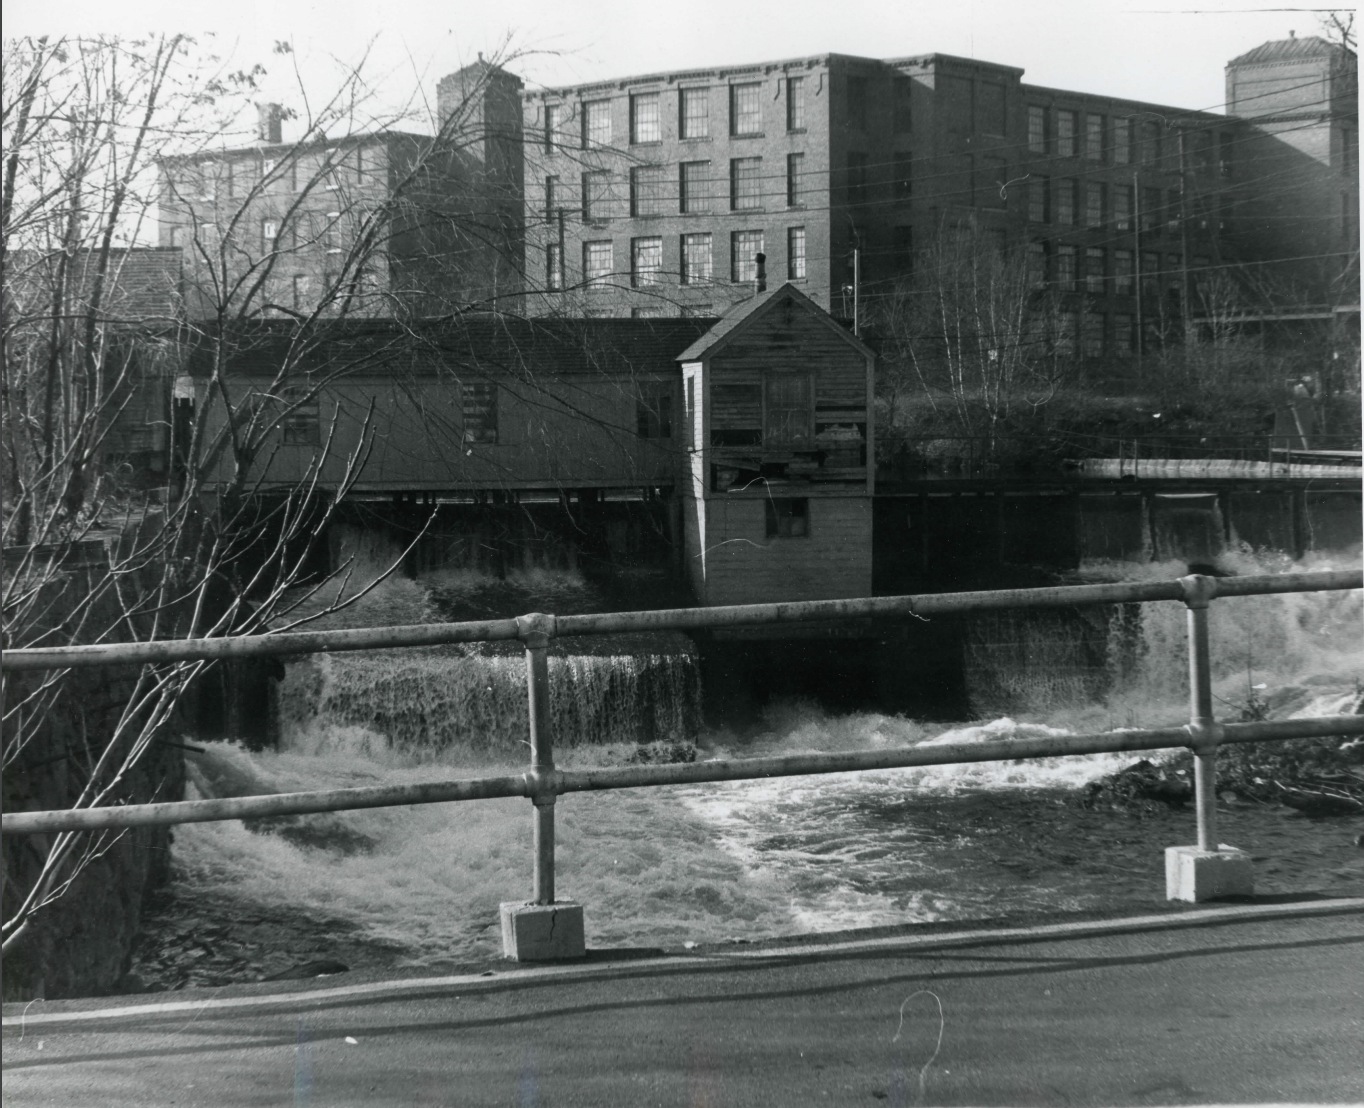 Lowell Plant and Machine shop behind waterfall